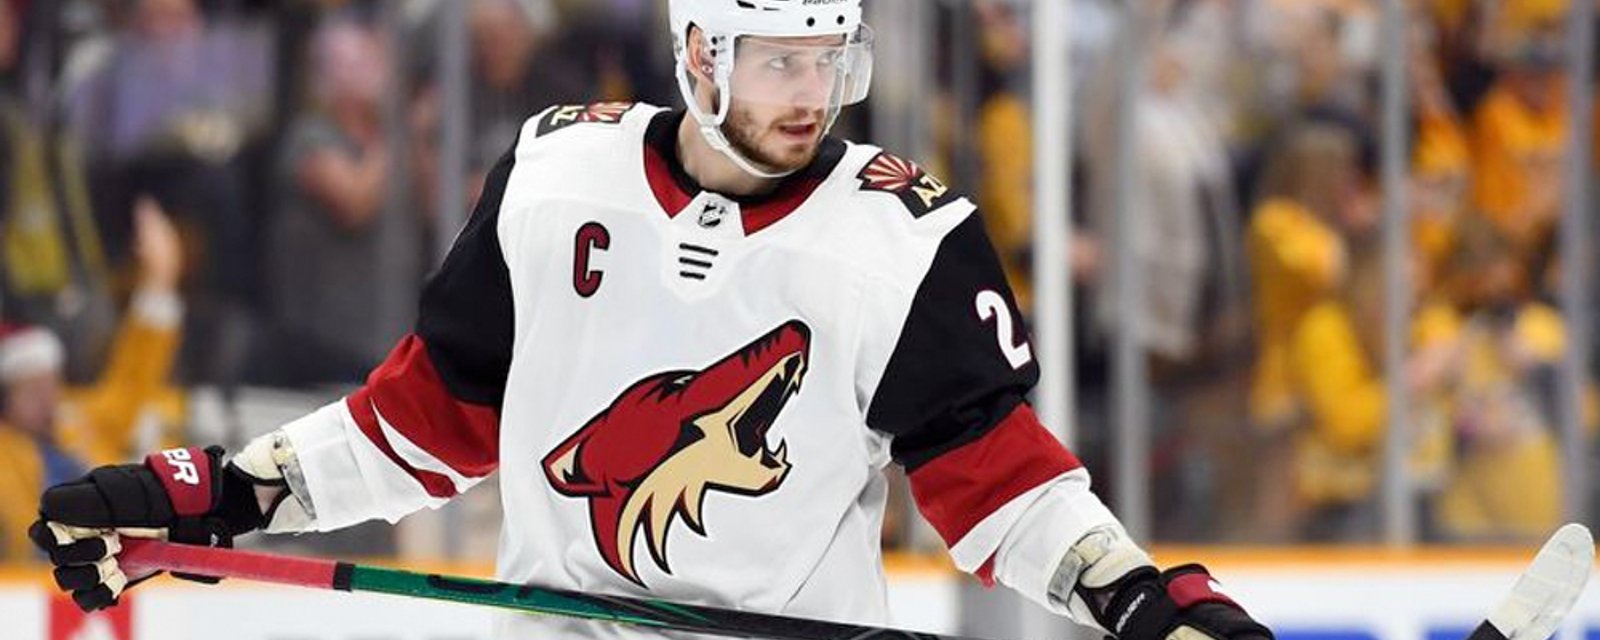 Ekman-Larsson finally speaks, claims he never demanded a trade